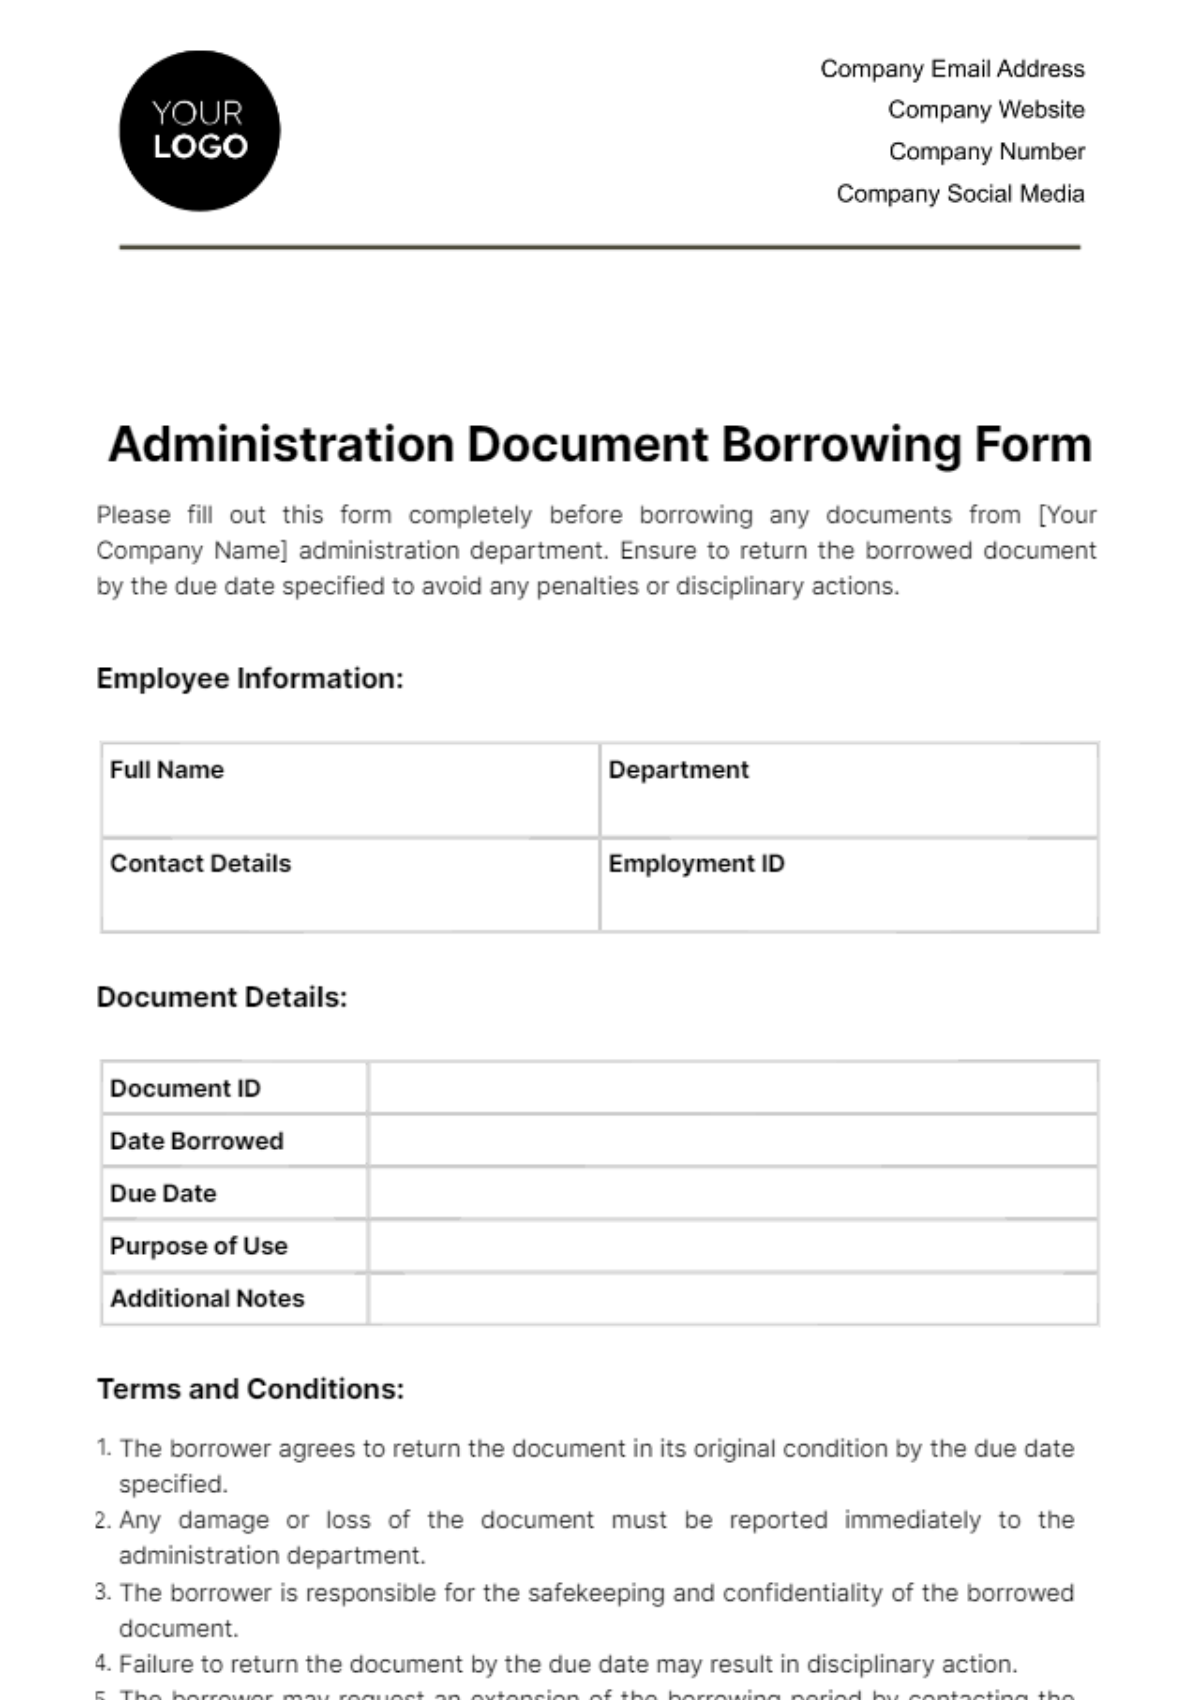 Administration Document Borrowing Form Template